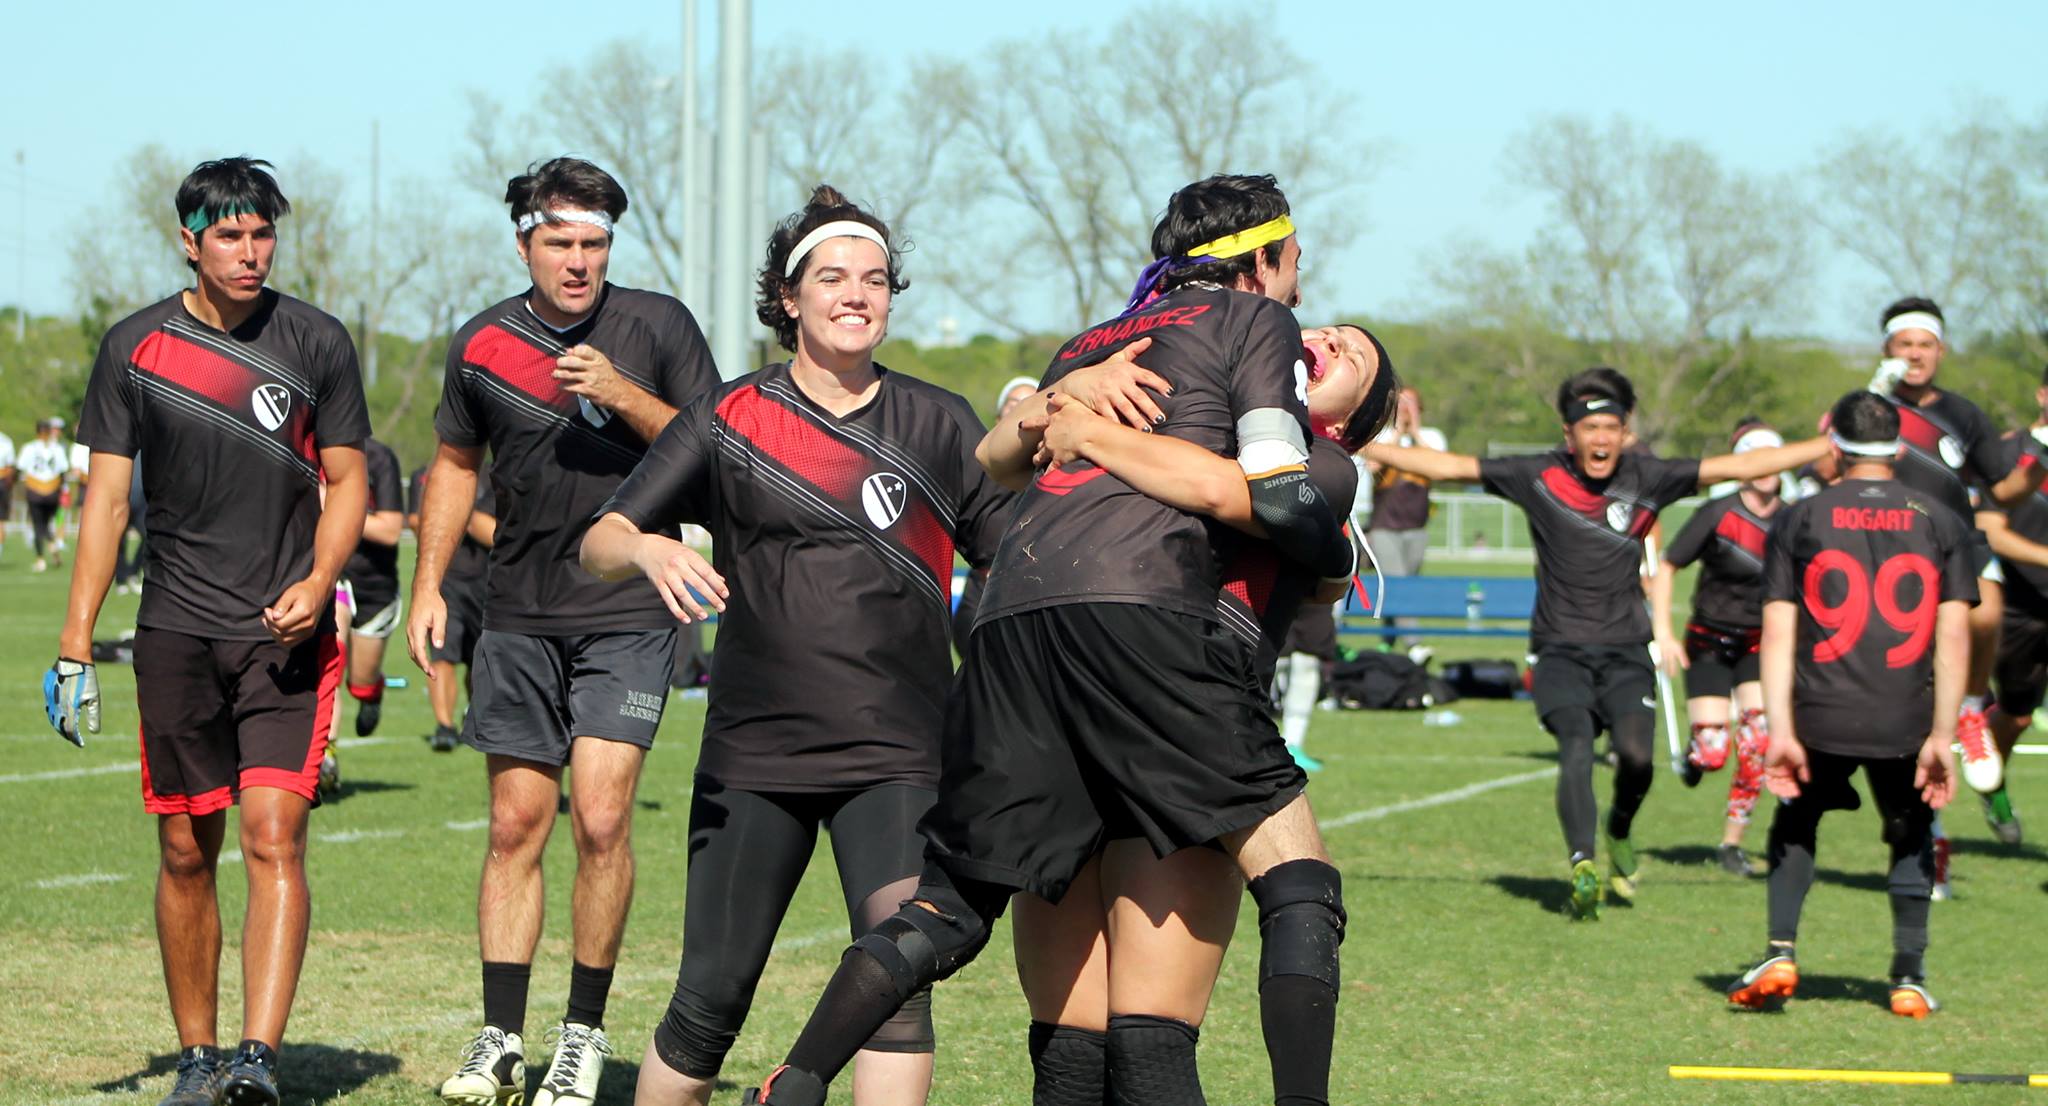 The Lost Boys celebrate after earning a spot in the Final Four at US Cup 11